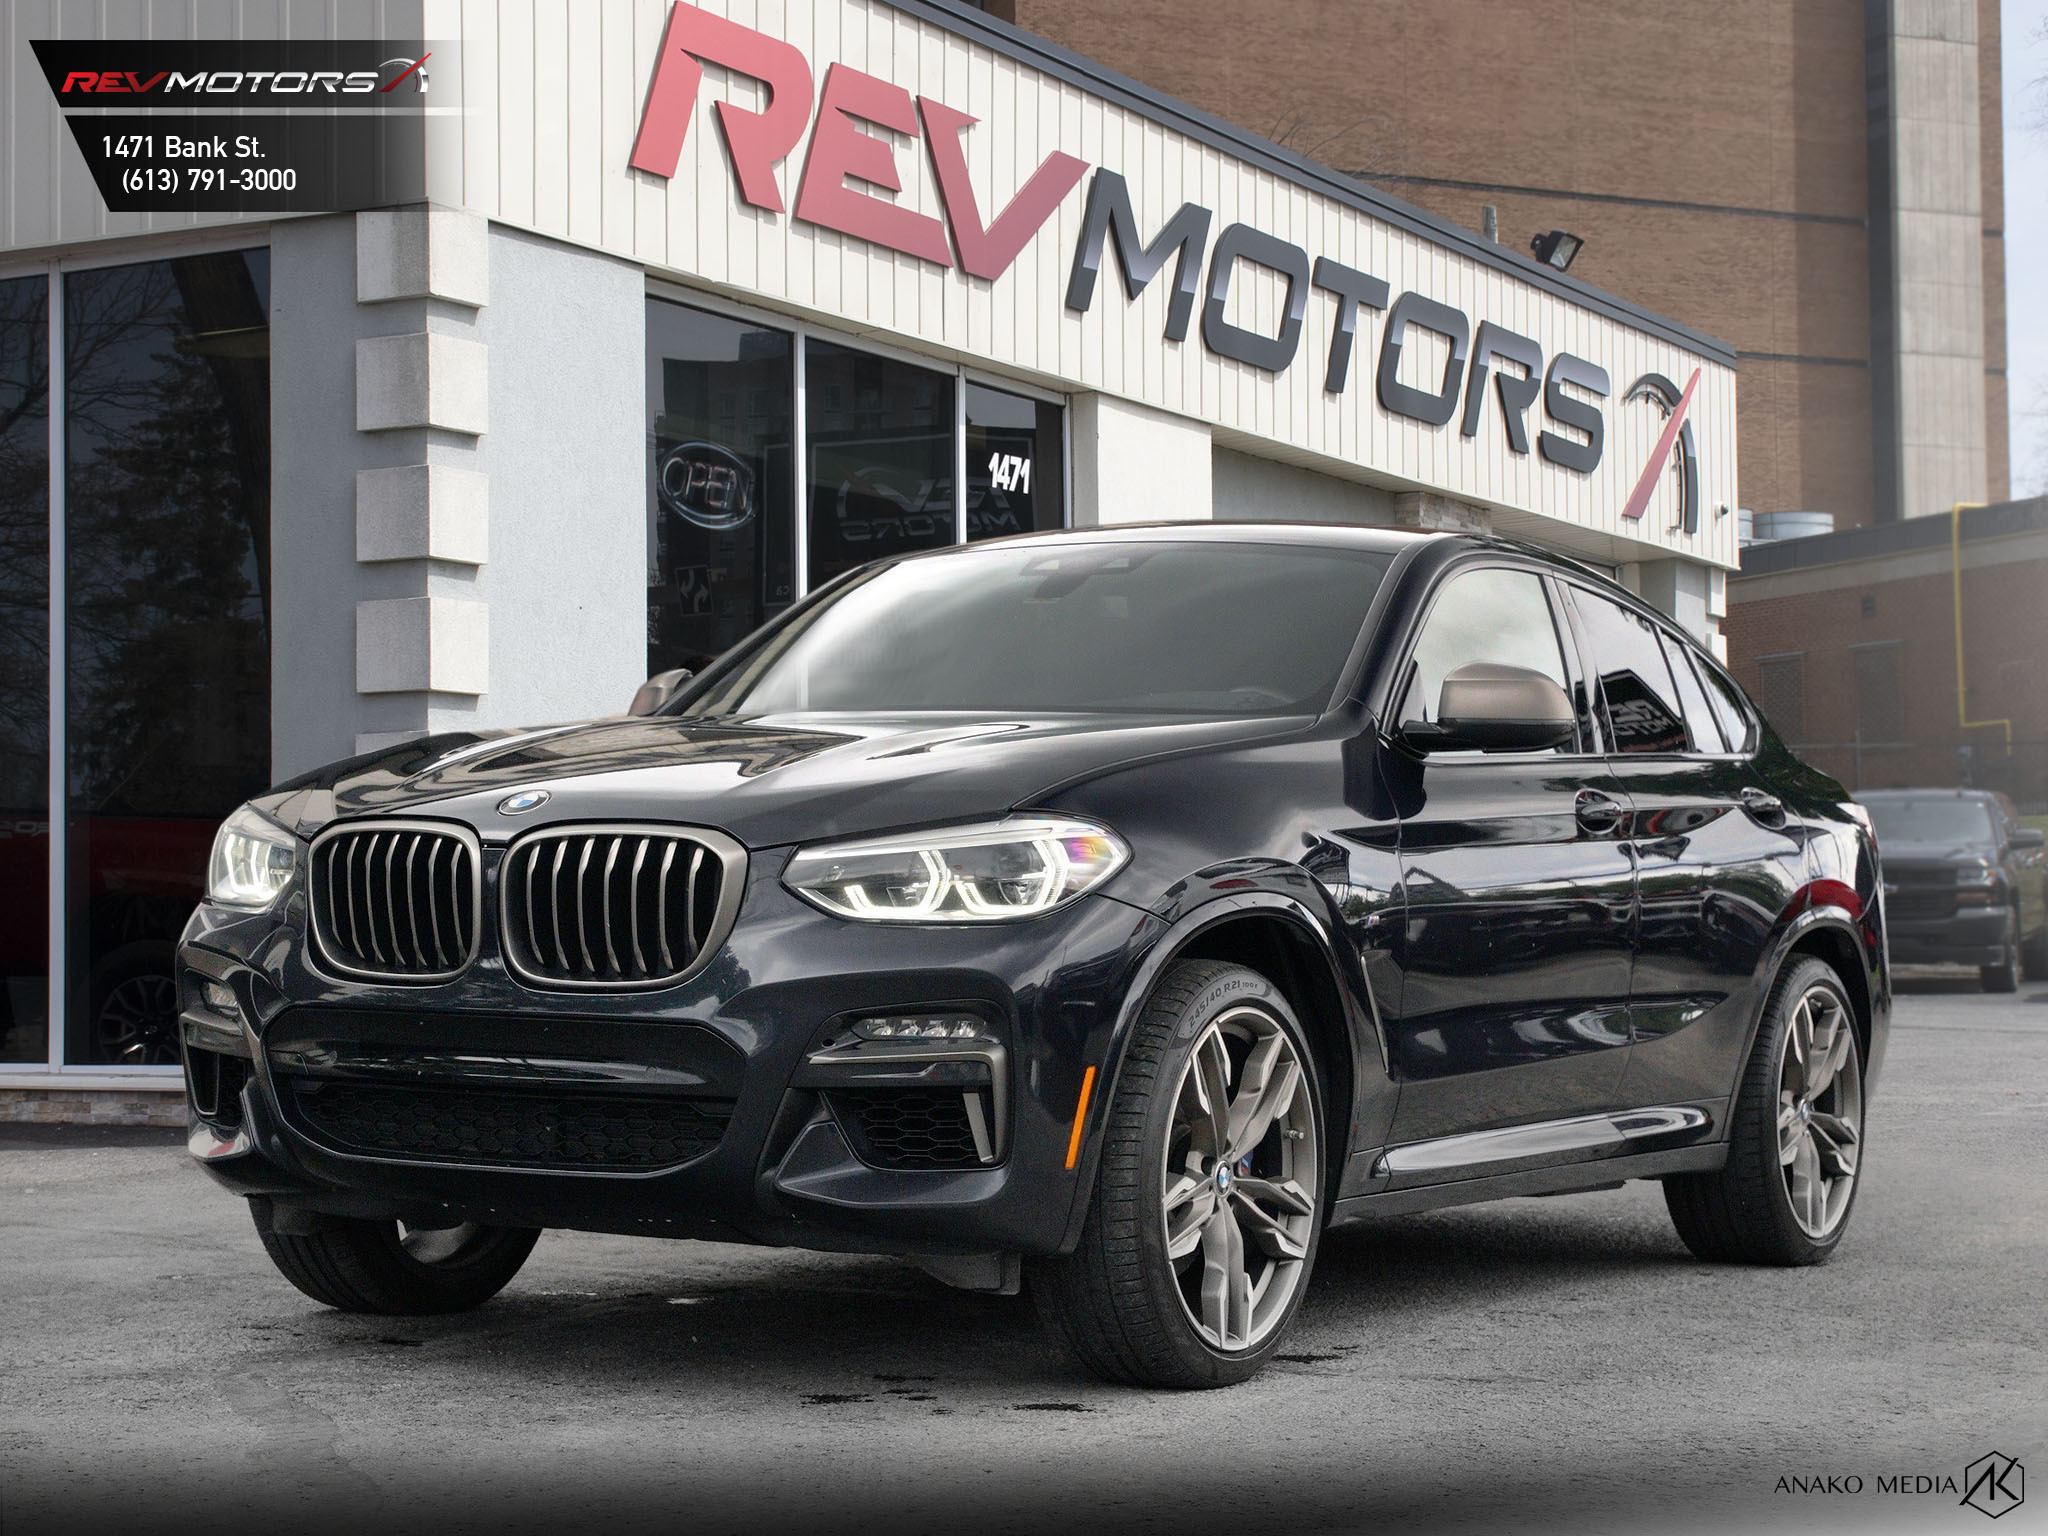 2020 BMW X4 M40i | 365HP | 1 Owner | Pano Roof